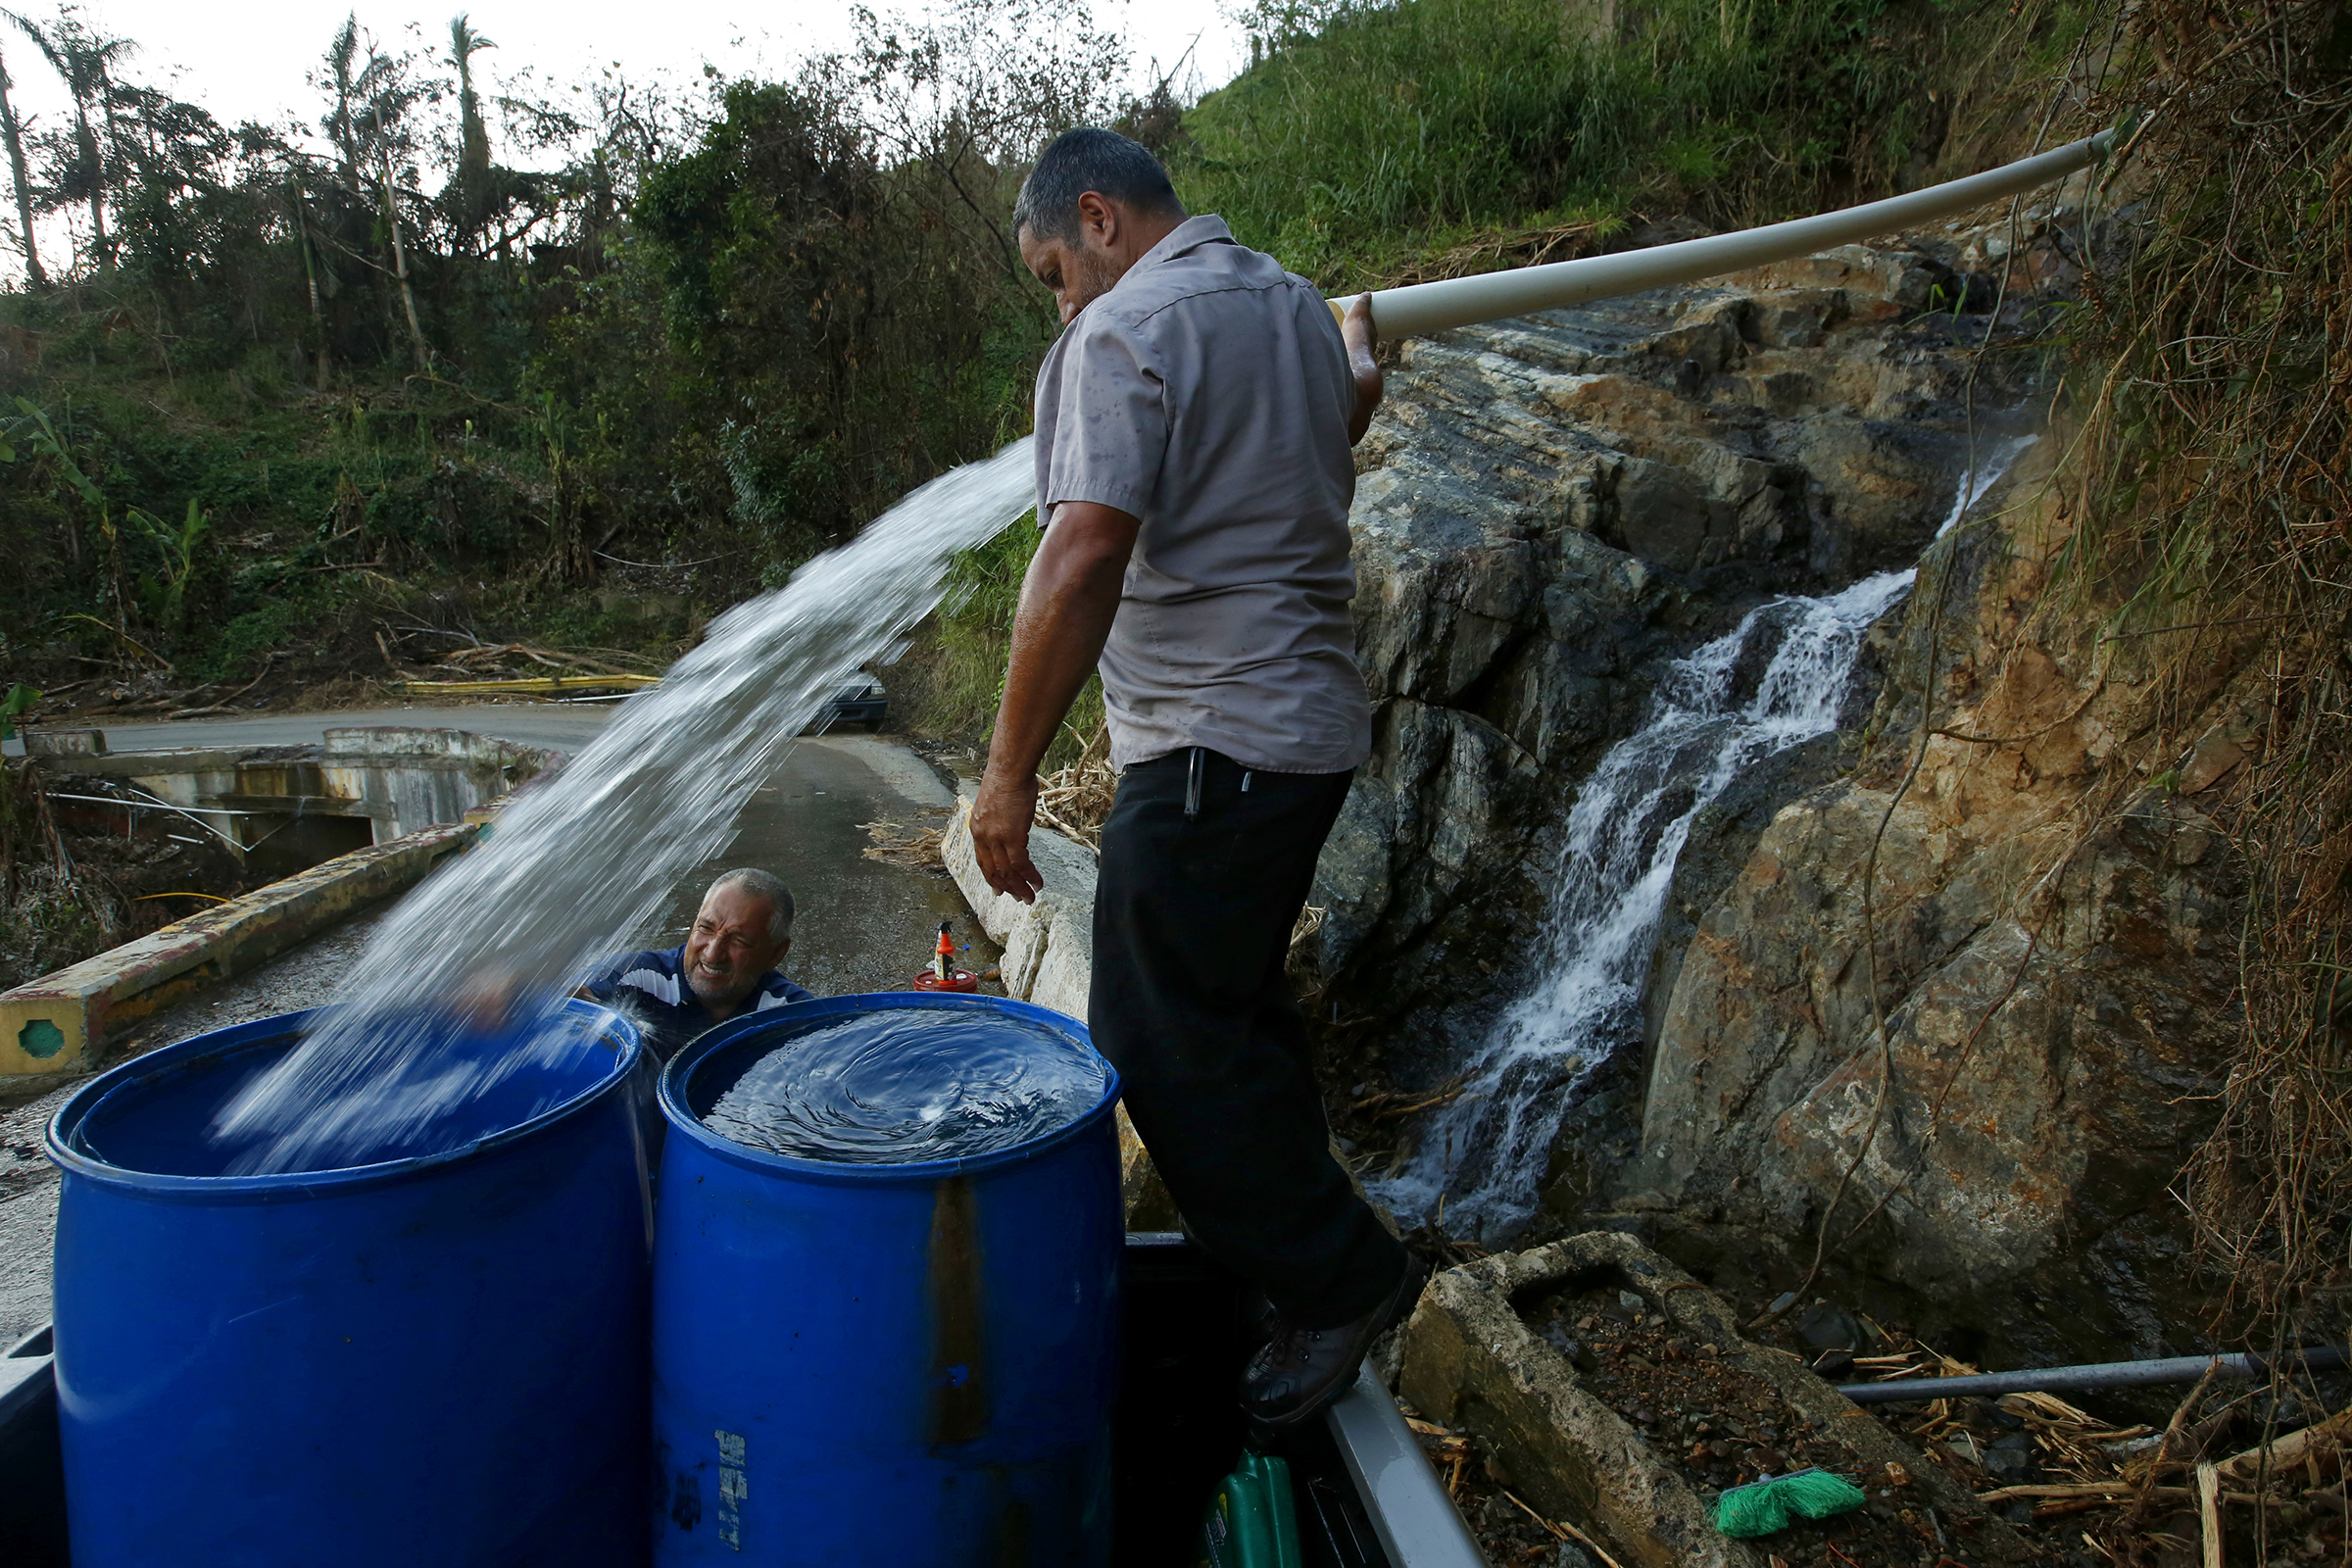 PHOTO: Luis Hernandez, left, gets help from Sergio Rivera, center, with filling drums with spring water for washing in Jayuya, Puerto Rico, the public water system isn't working full-time, so many collect water from the mountain springs, Oct. 4, 2017.